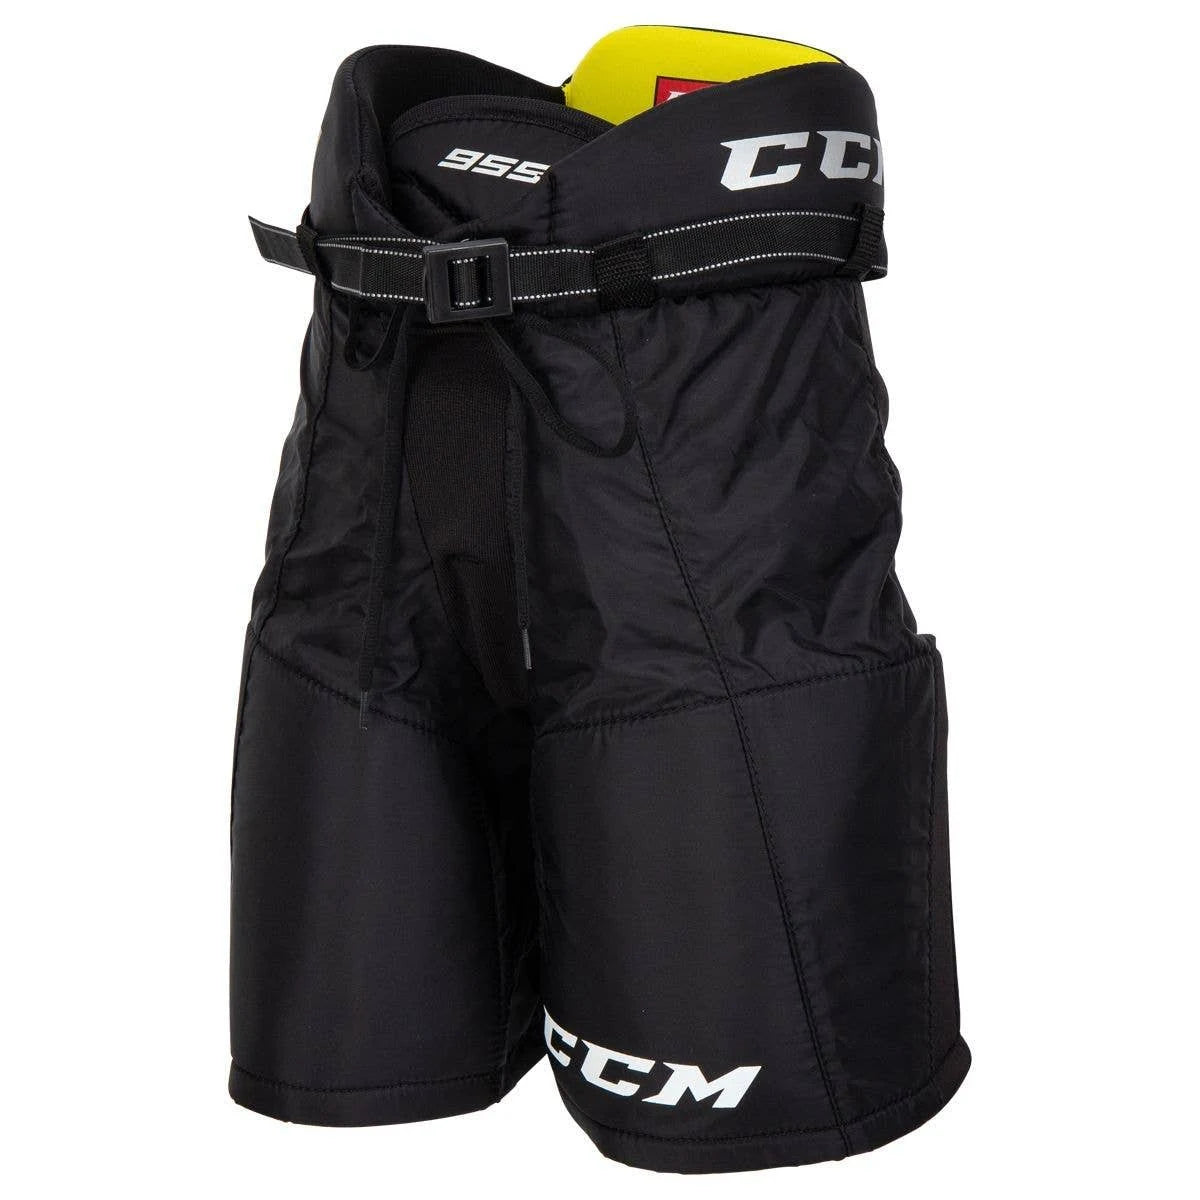 Ccm Tacks 9550 Junior Hockey Pants-Ccm-Sports Replay - Sports Excellence